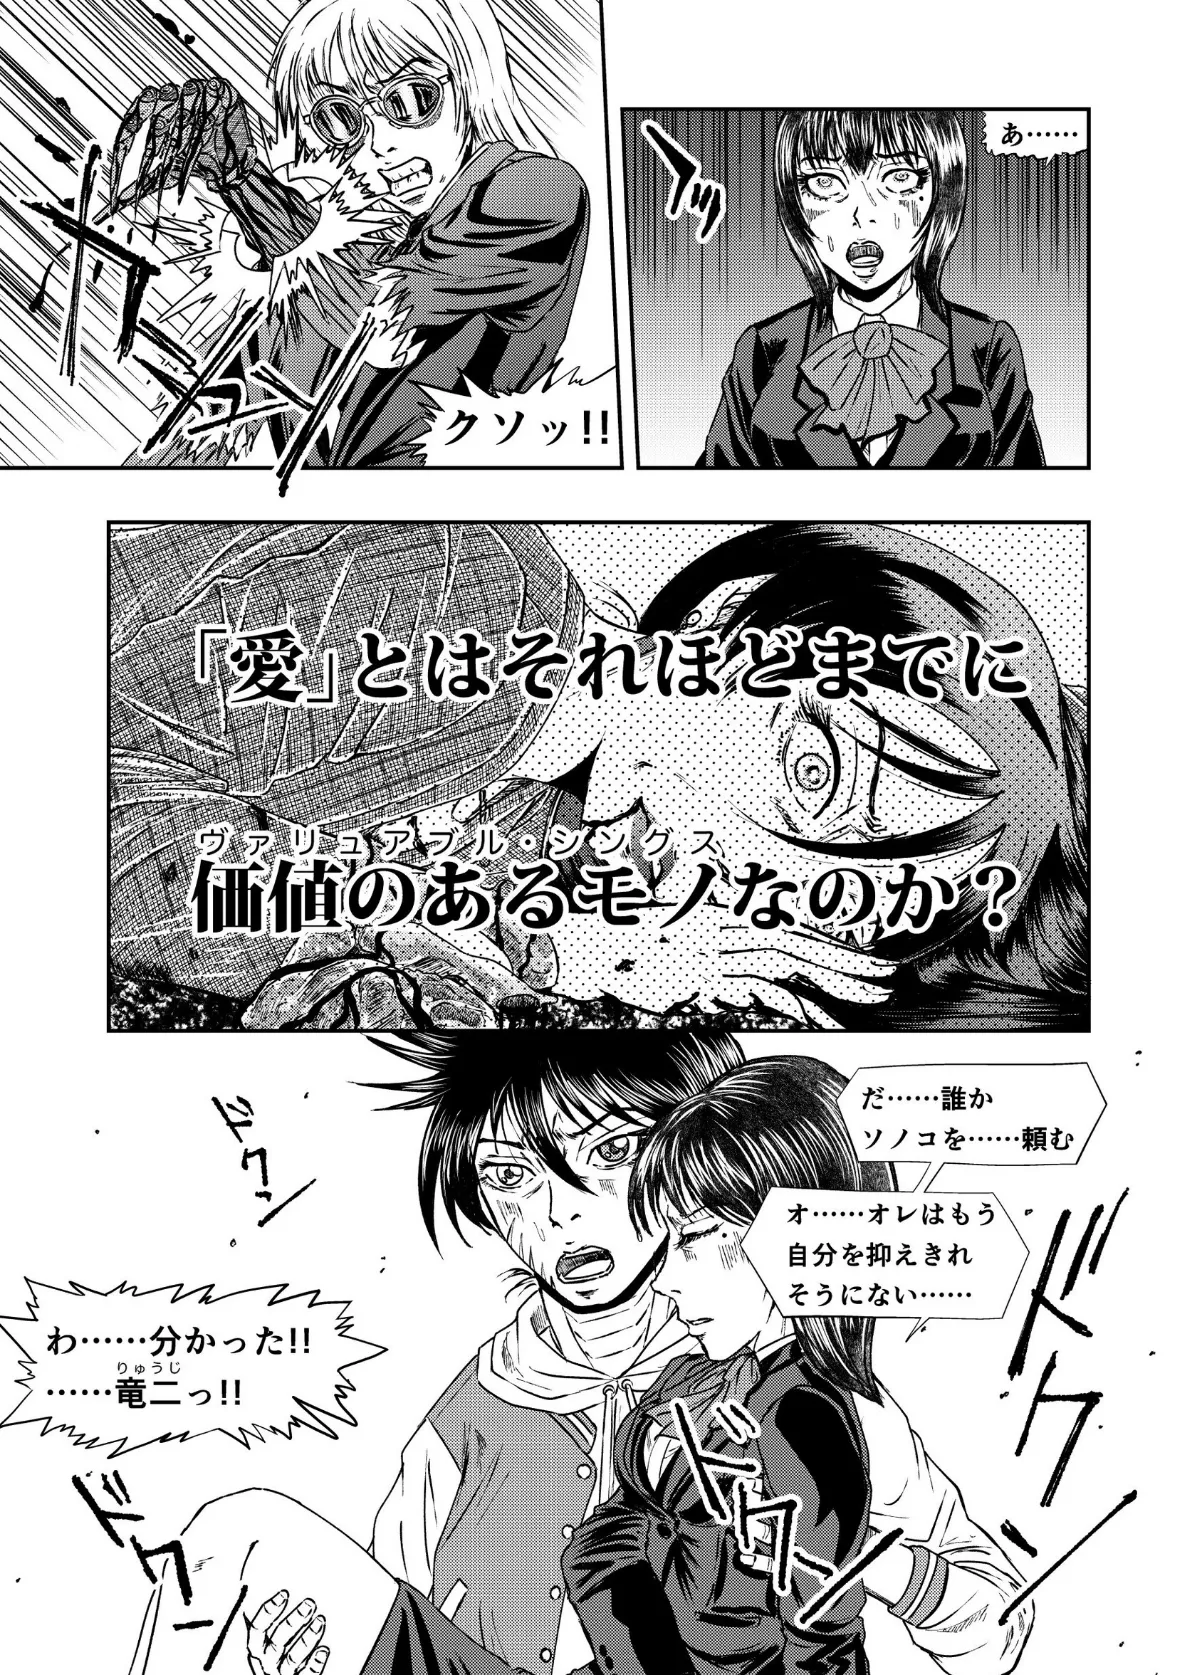 XENON REBOOT＜BASED STORY ON ’BIO DIVER XENON’＞【分冊版】 Chapter1 STRANGERS When We Meet（4） 15ページ